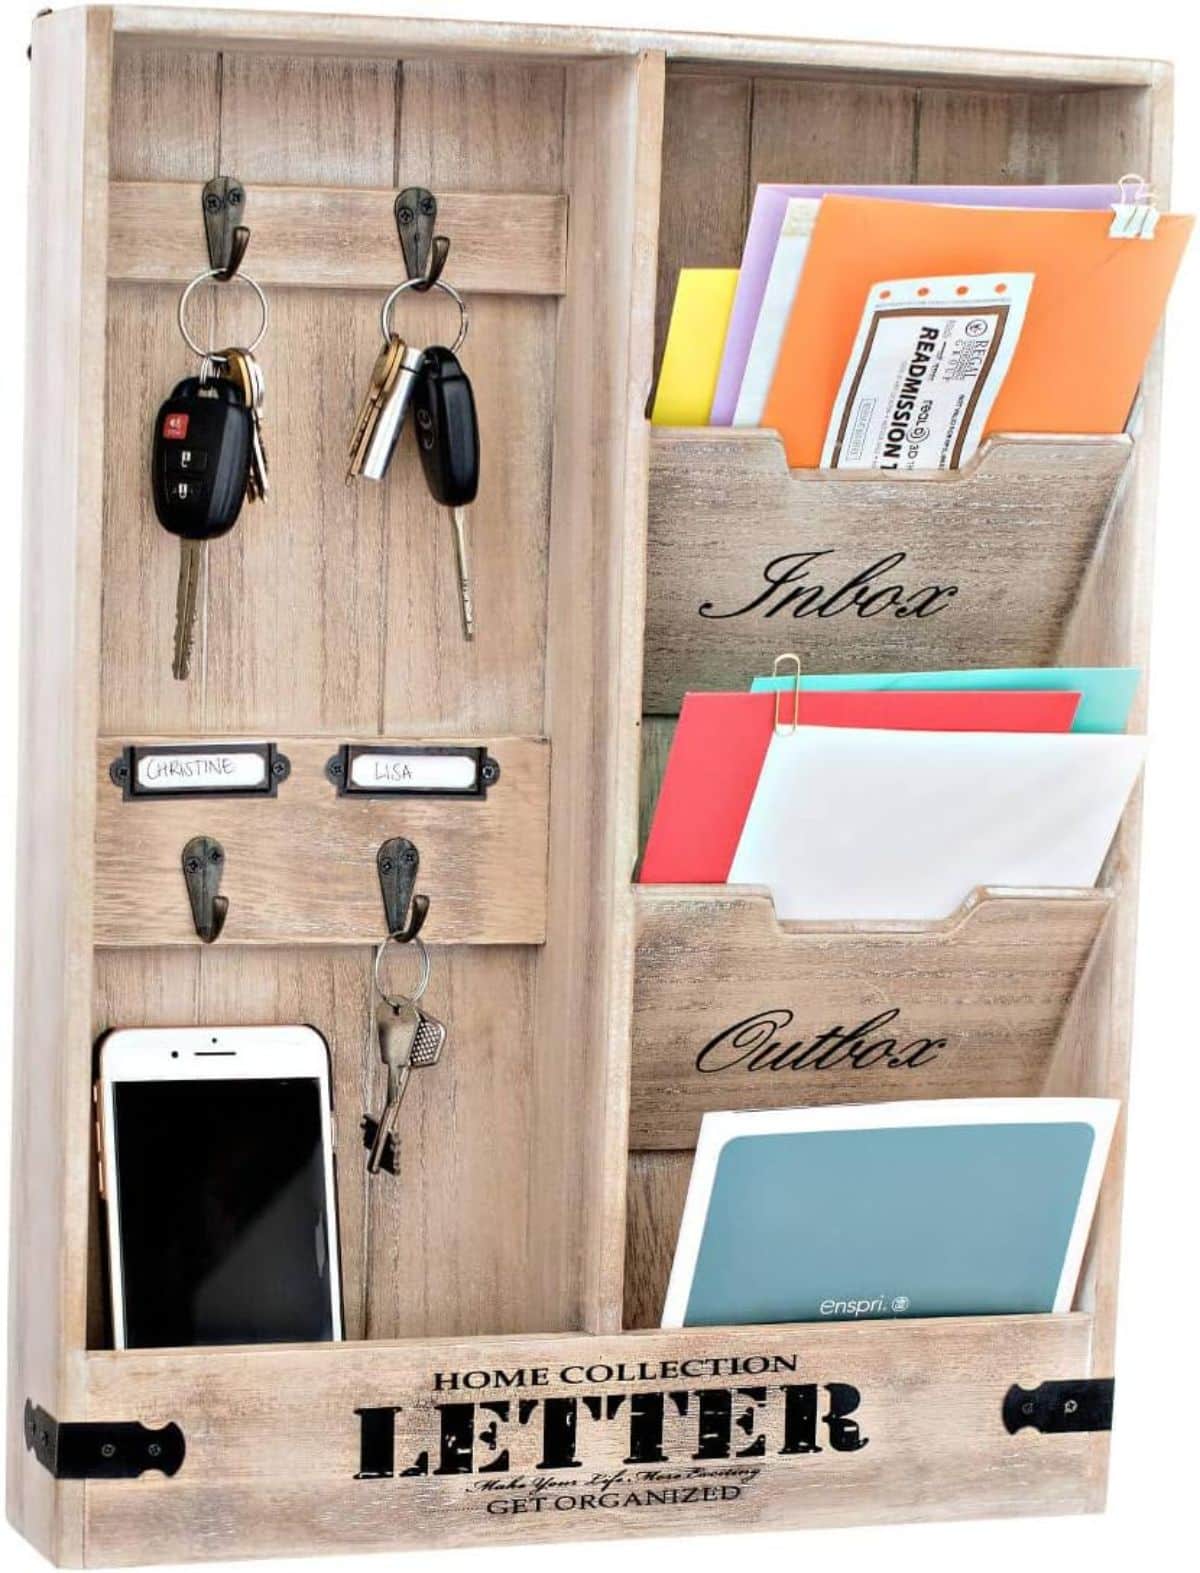 DIY Rustic Mail Organizer Wall Mount and Key Holder for Wall